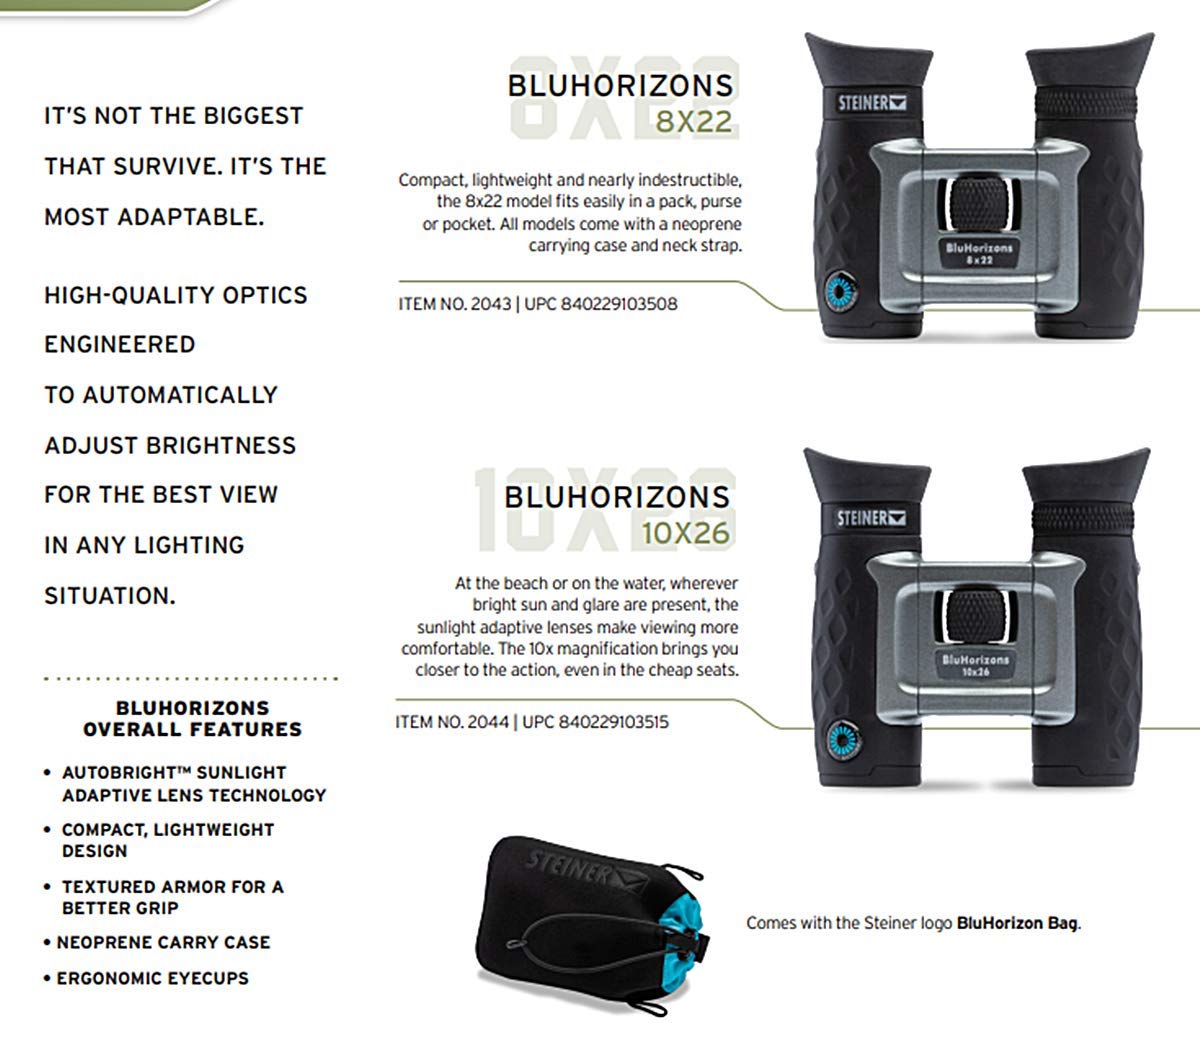 Steiner BluHorizons Binoculars - Unique Lens Technology, Eye Protection, Compact, Lightweight - Ideal for Outdoor Activities and Sporting Events